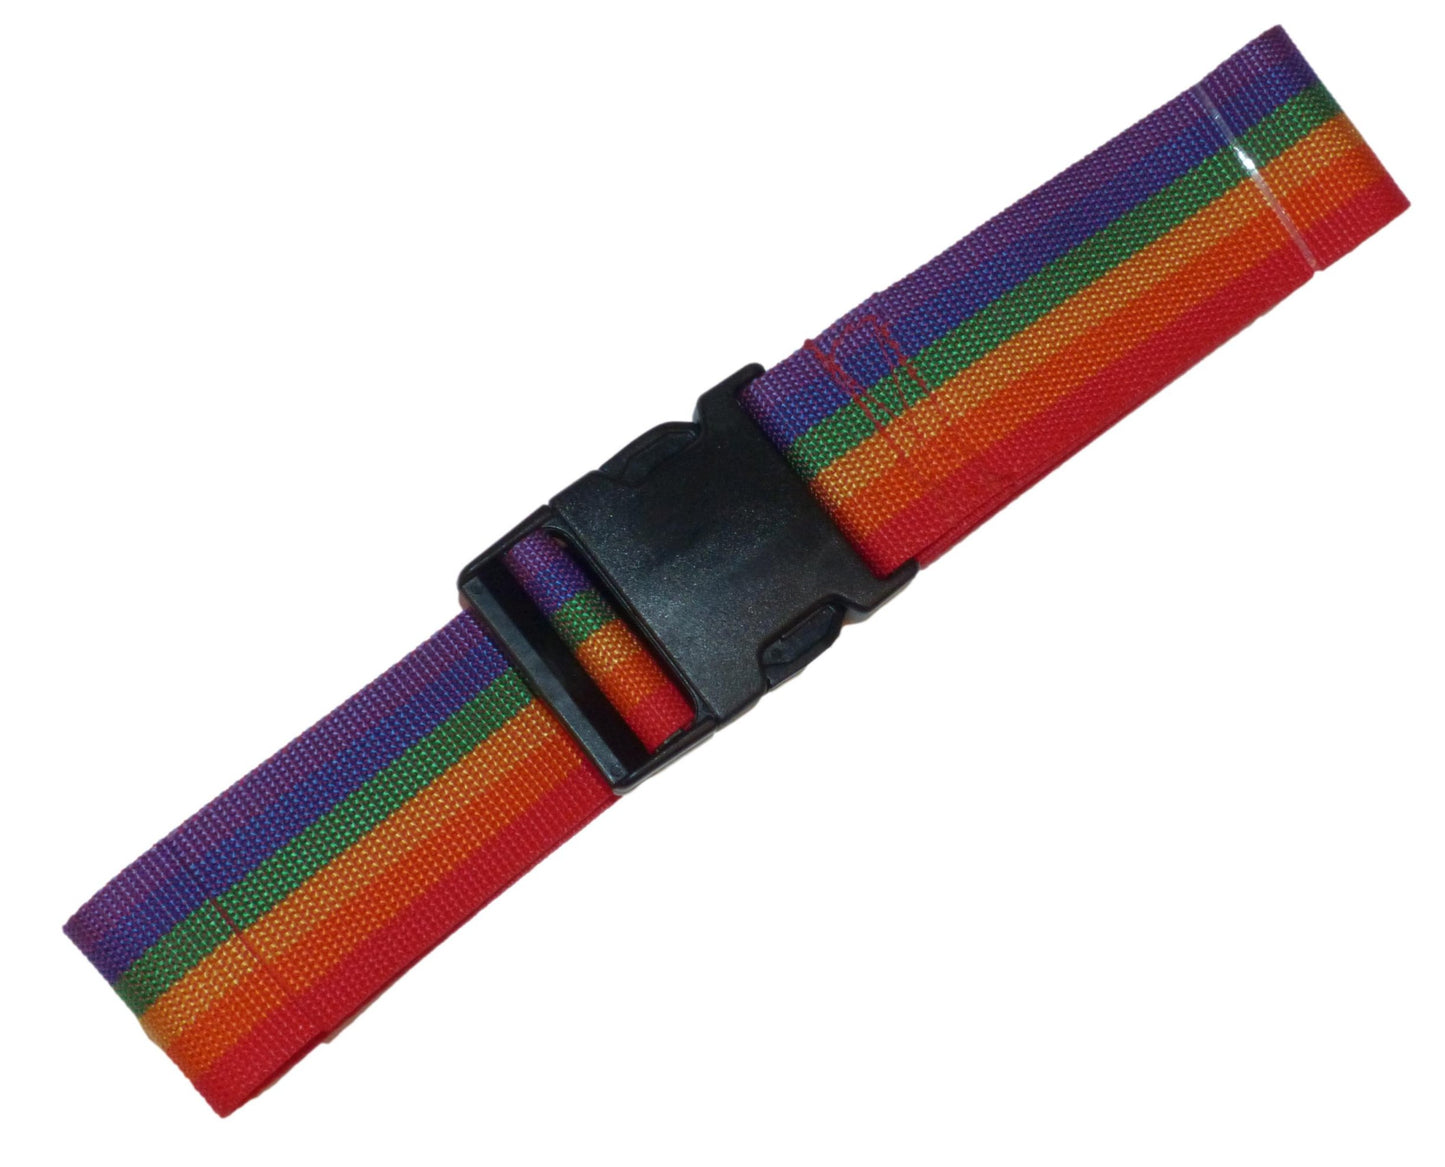 Benristraps 50mm Webbing Strap with Quick Release Buckle in rainbow